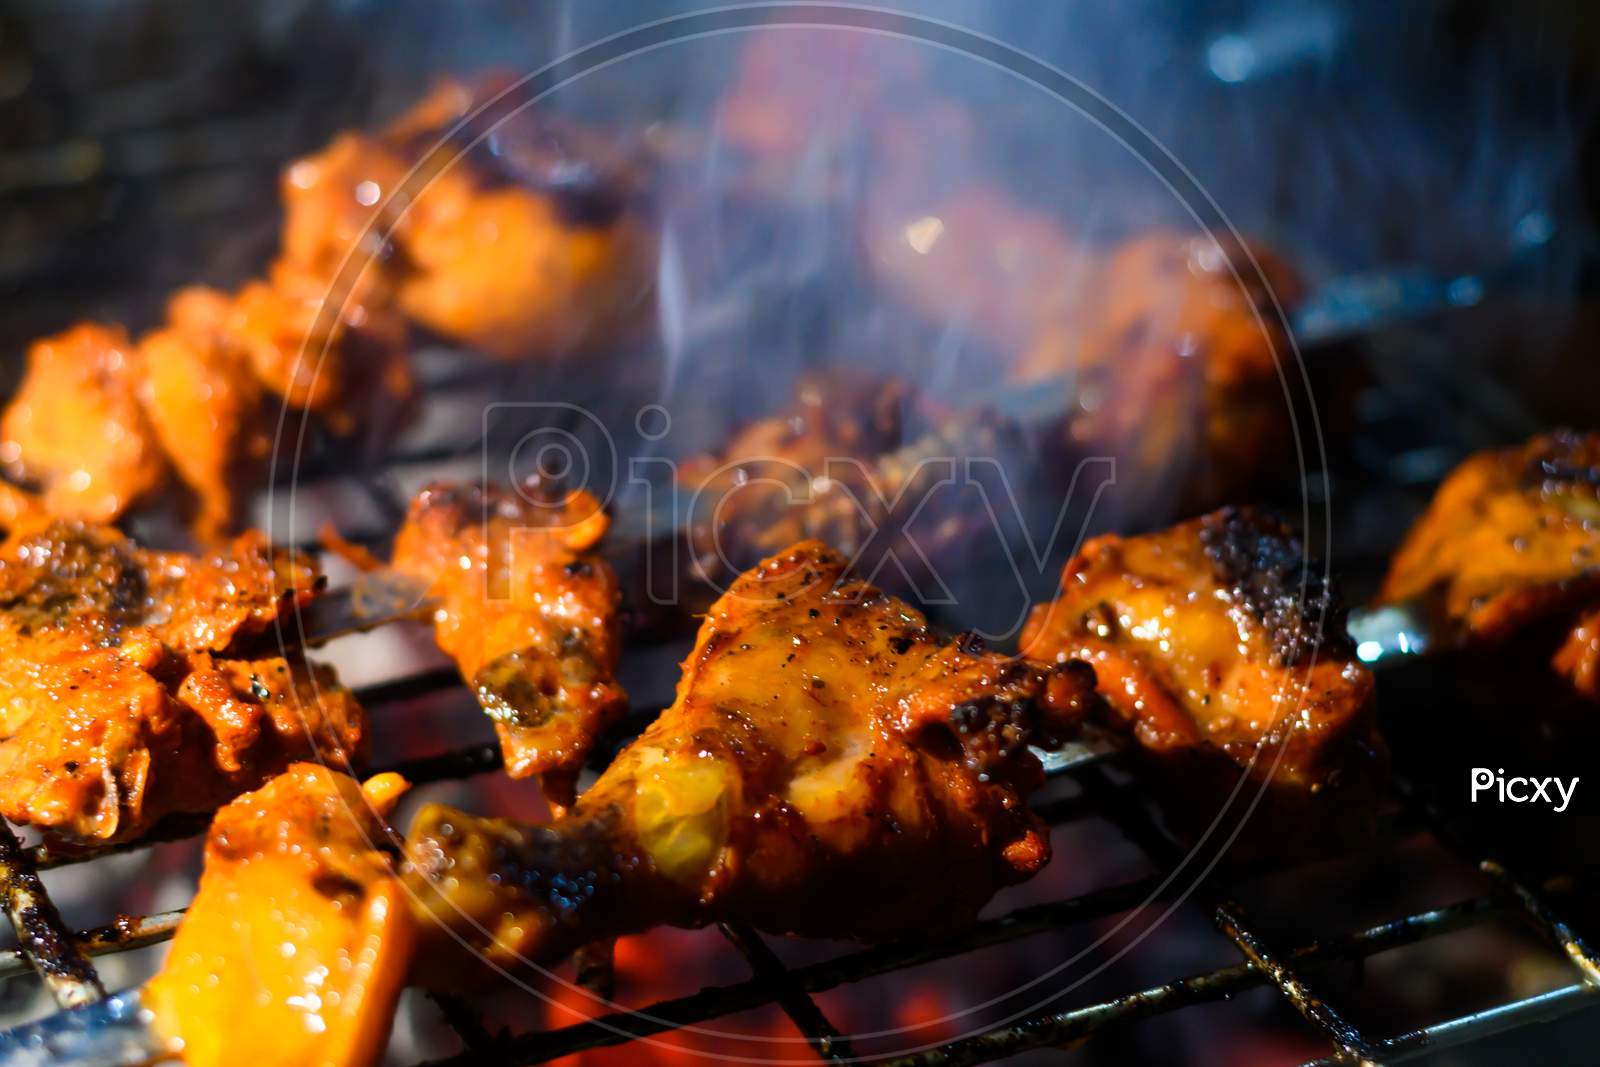 Delicious Grilled Tandoori Of Assorted Meats Over Charcoal And Hot Grill On Skewers